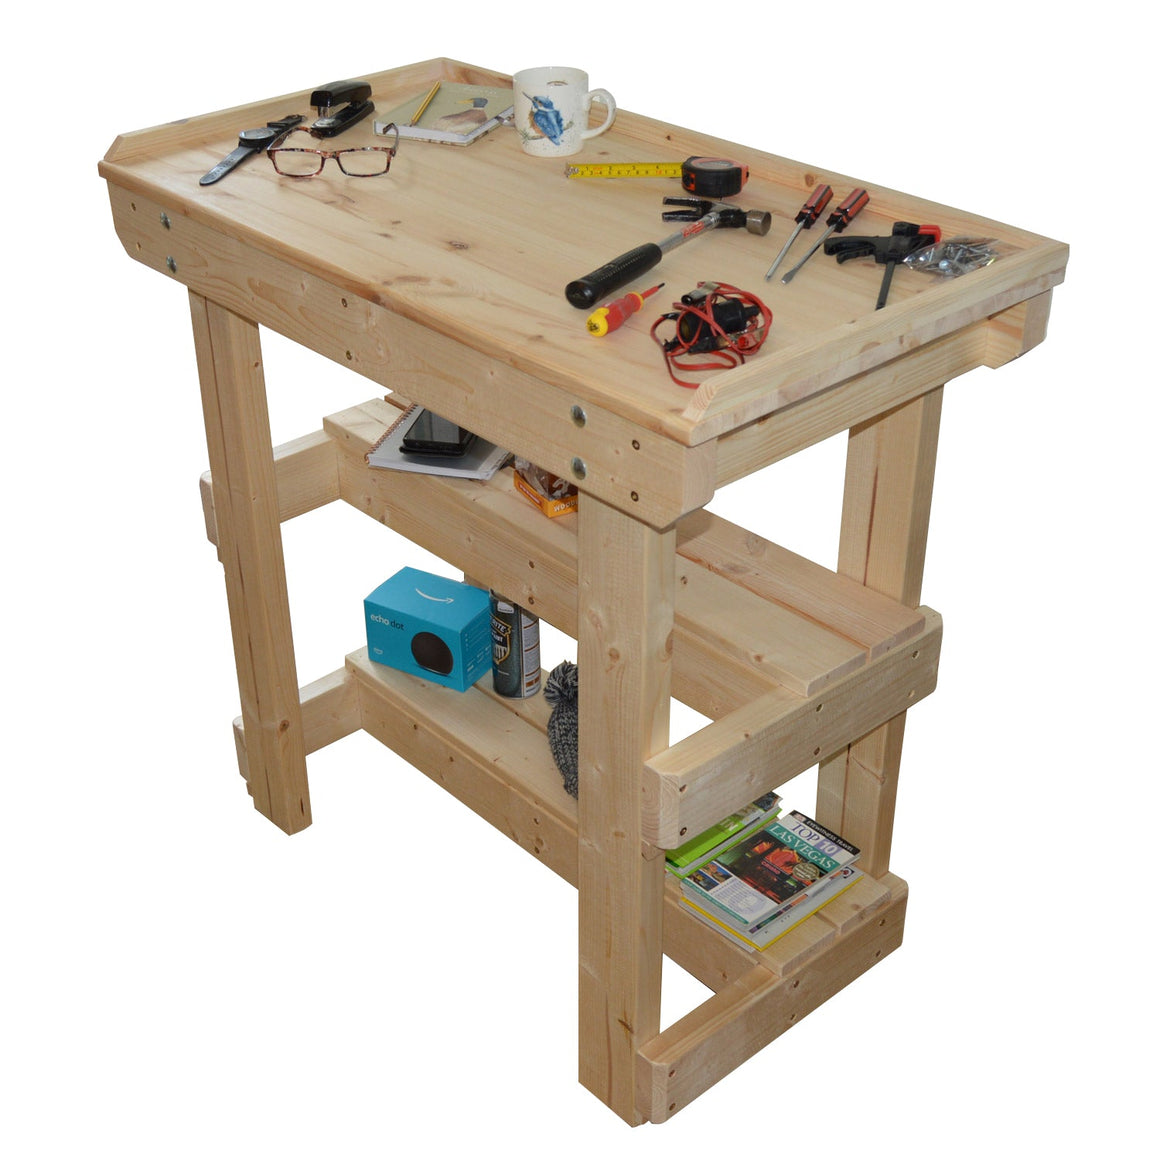 Sit down crafting workbench with worktop lip